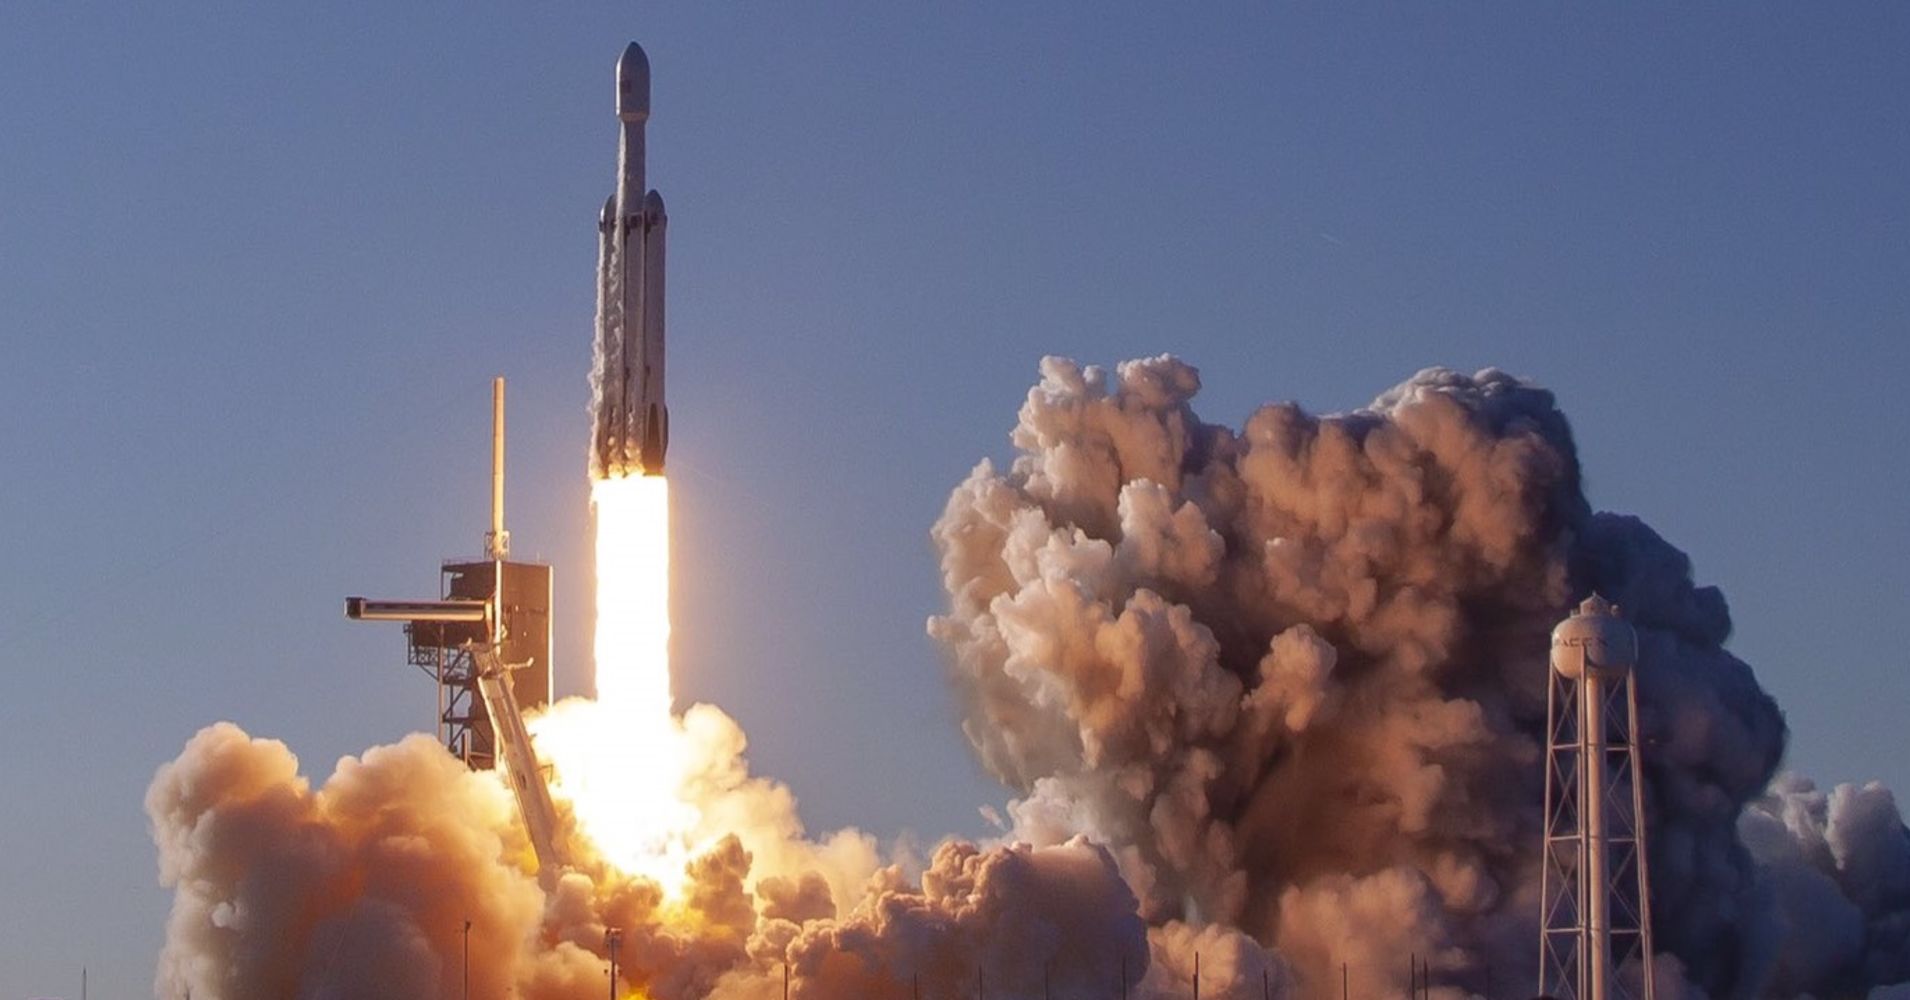 SpaceX launches the Falcon Heavy rocket on its first commercial mission.